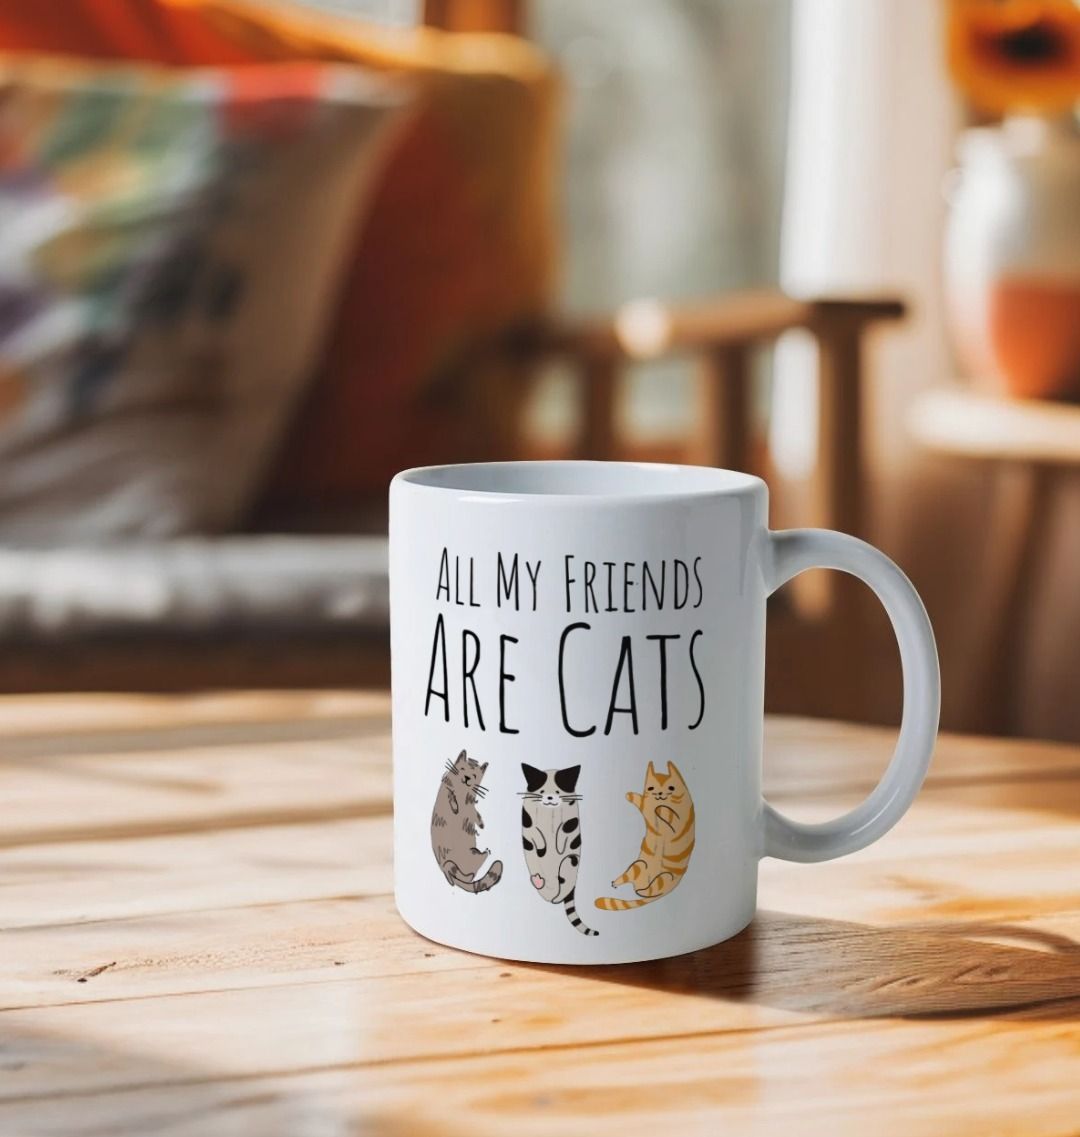 All My Friends are cats - Mug